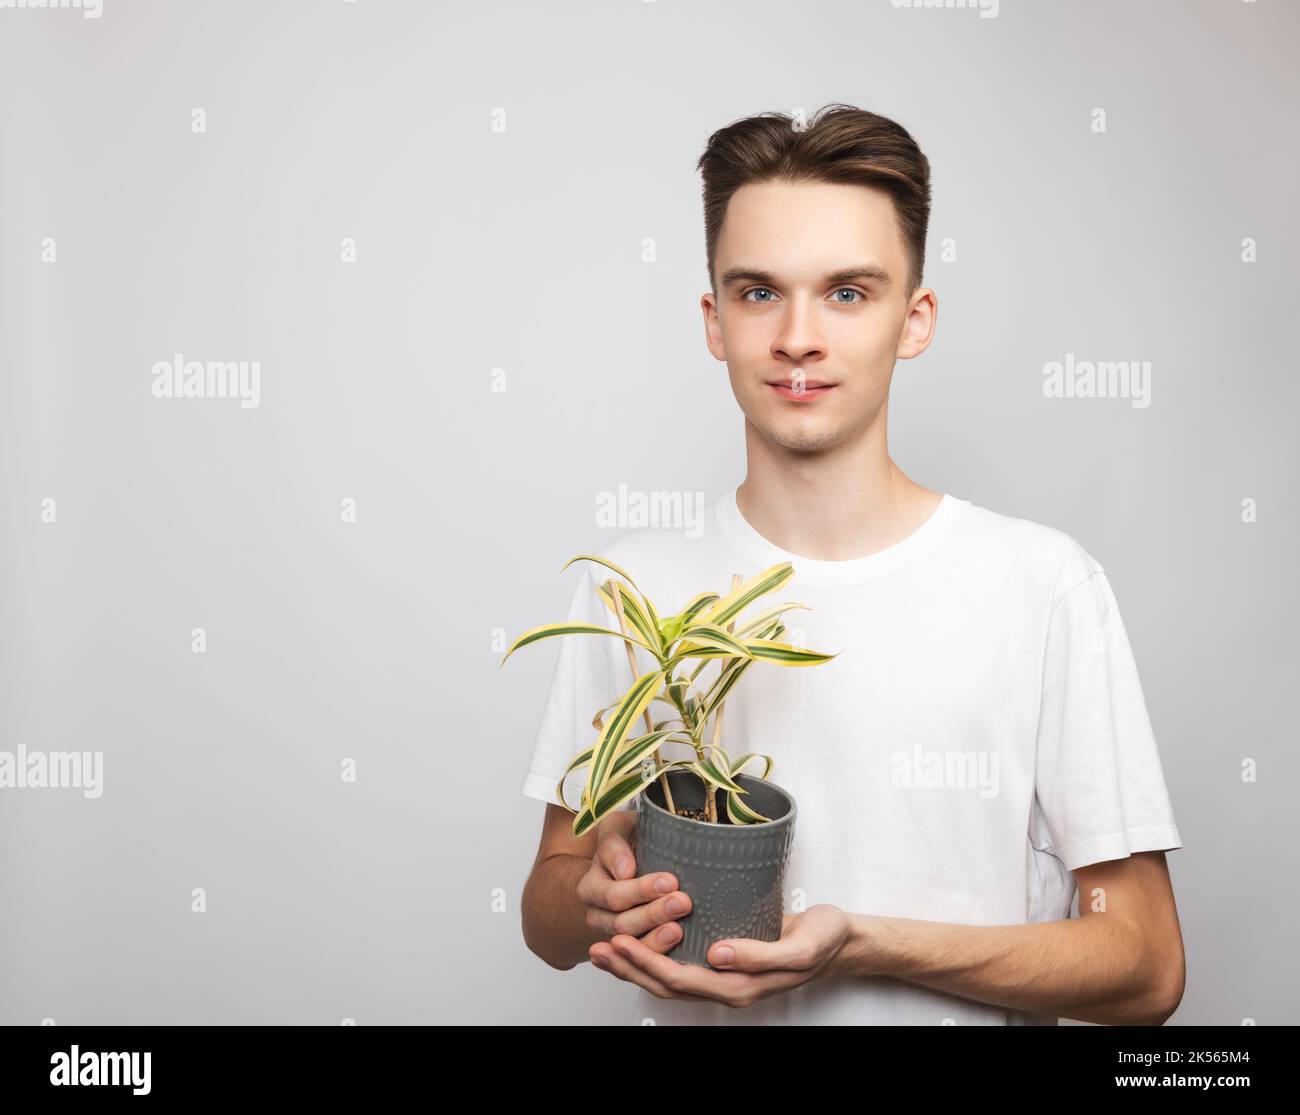 Portrait of cheerful young man wearing white t-shirt holding potted house plant looking at camera smiling. Studio shot on gray background Stock Photo